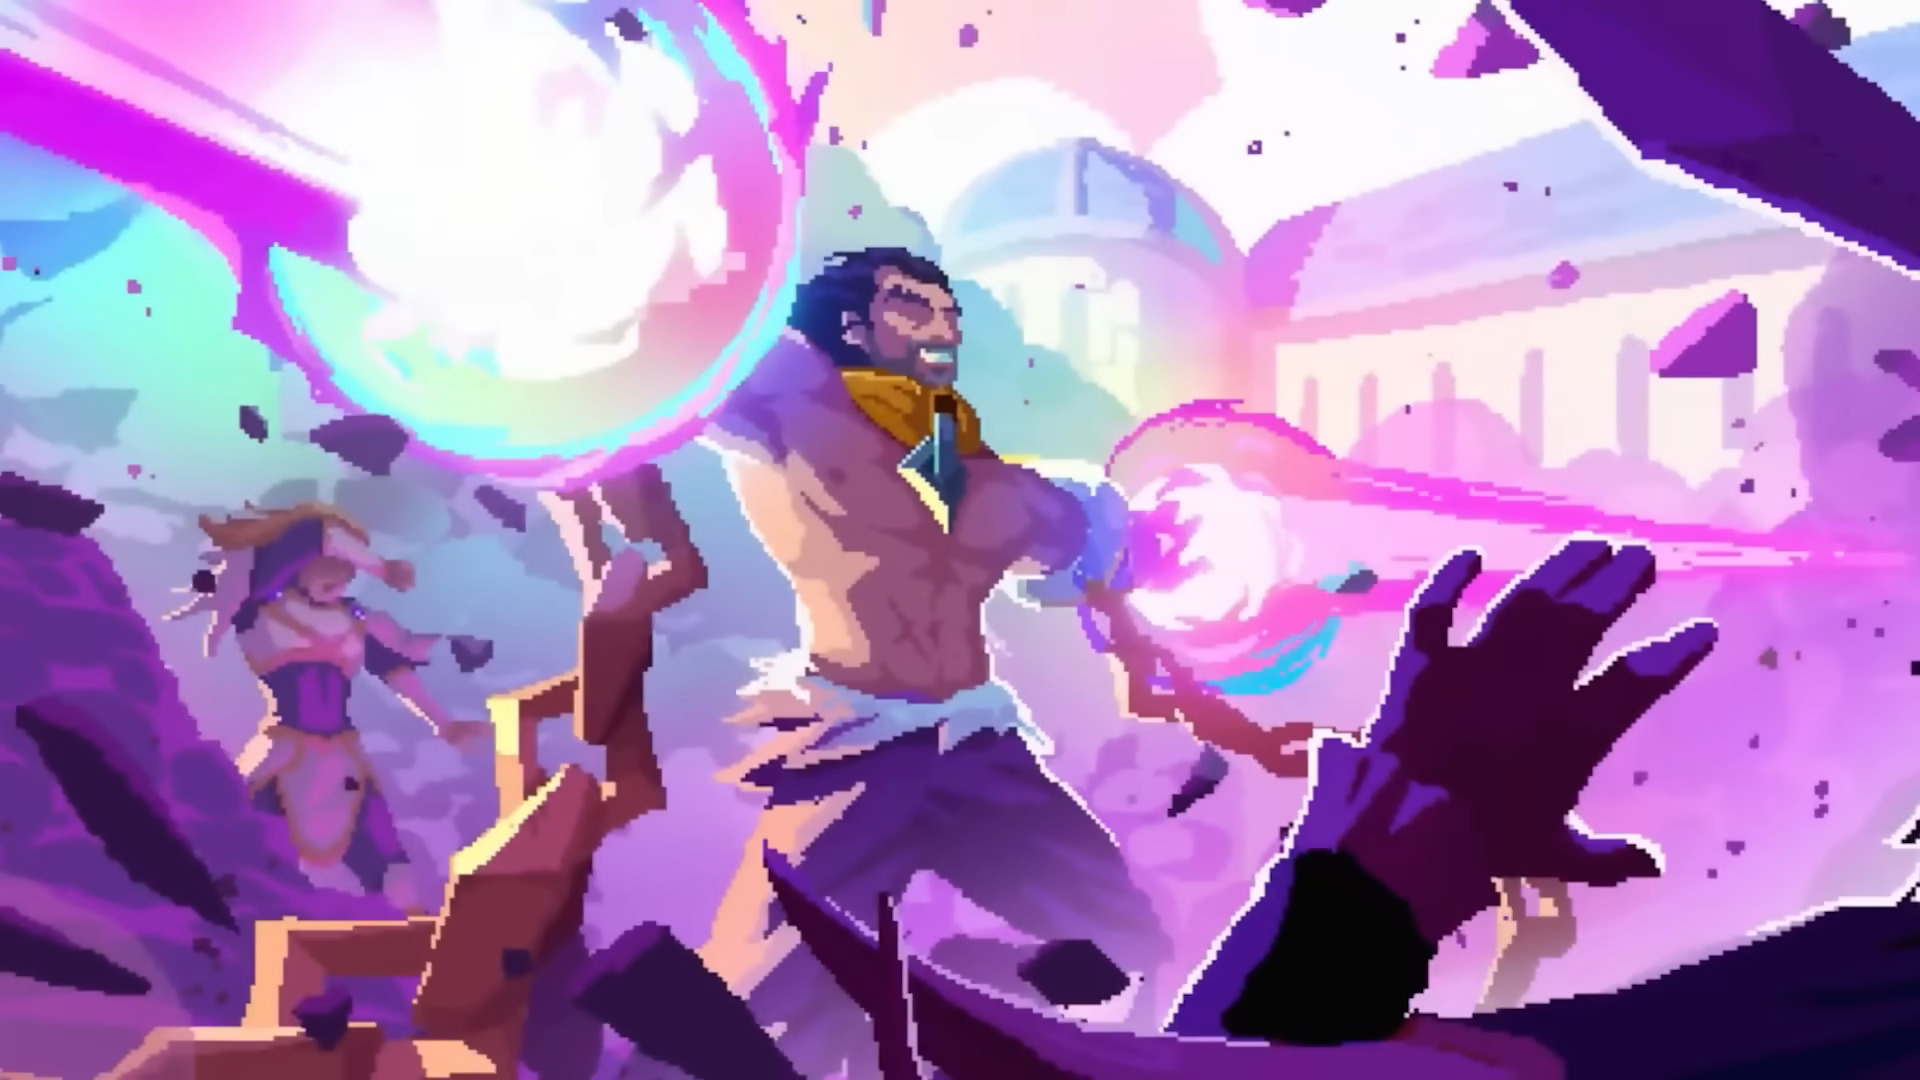  That 2D League of Legends RPG from the Moonlighter devs just got an imminent release date and a gameplay trailer 